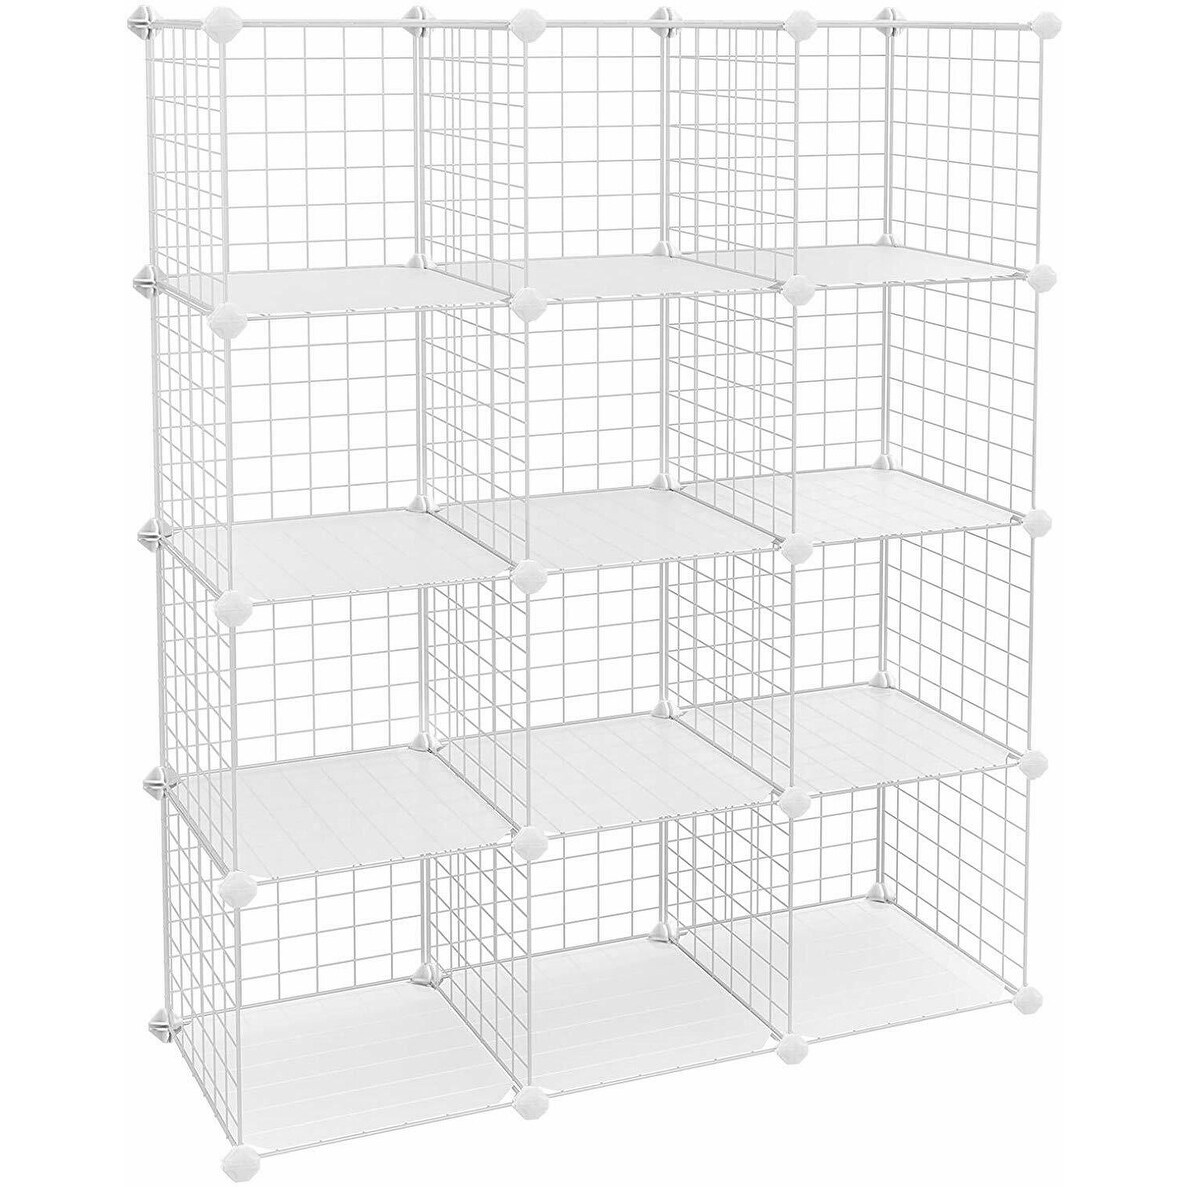 https://ak1.ostkcdn.com/images/products/is/images/direct/4b3612b9bfb0f3123b7d6b9654952df341809698/Metal-Wire-Cube-Storage%2C12-Cube-Shelves-Organizer%2CStackable-Storage-Bins%2C-DIY-Closet-Cabinet-Shelf%2C-36.6%E2%80%9DL-x-12.2%E2%80%9DW-x-48.4%E2%80%9DH-W.jpg